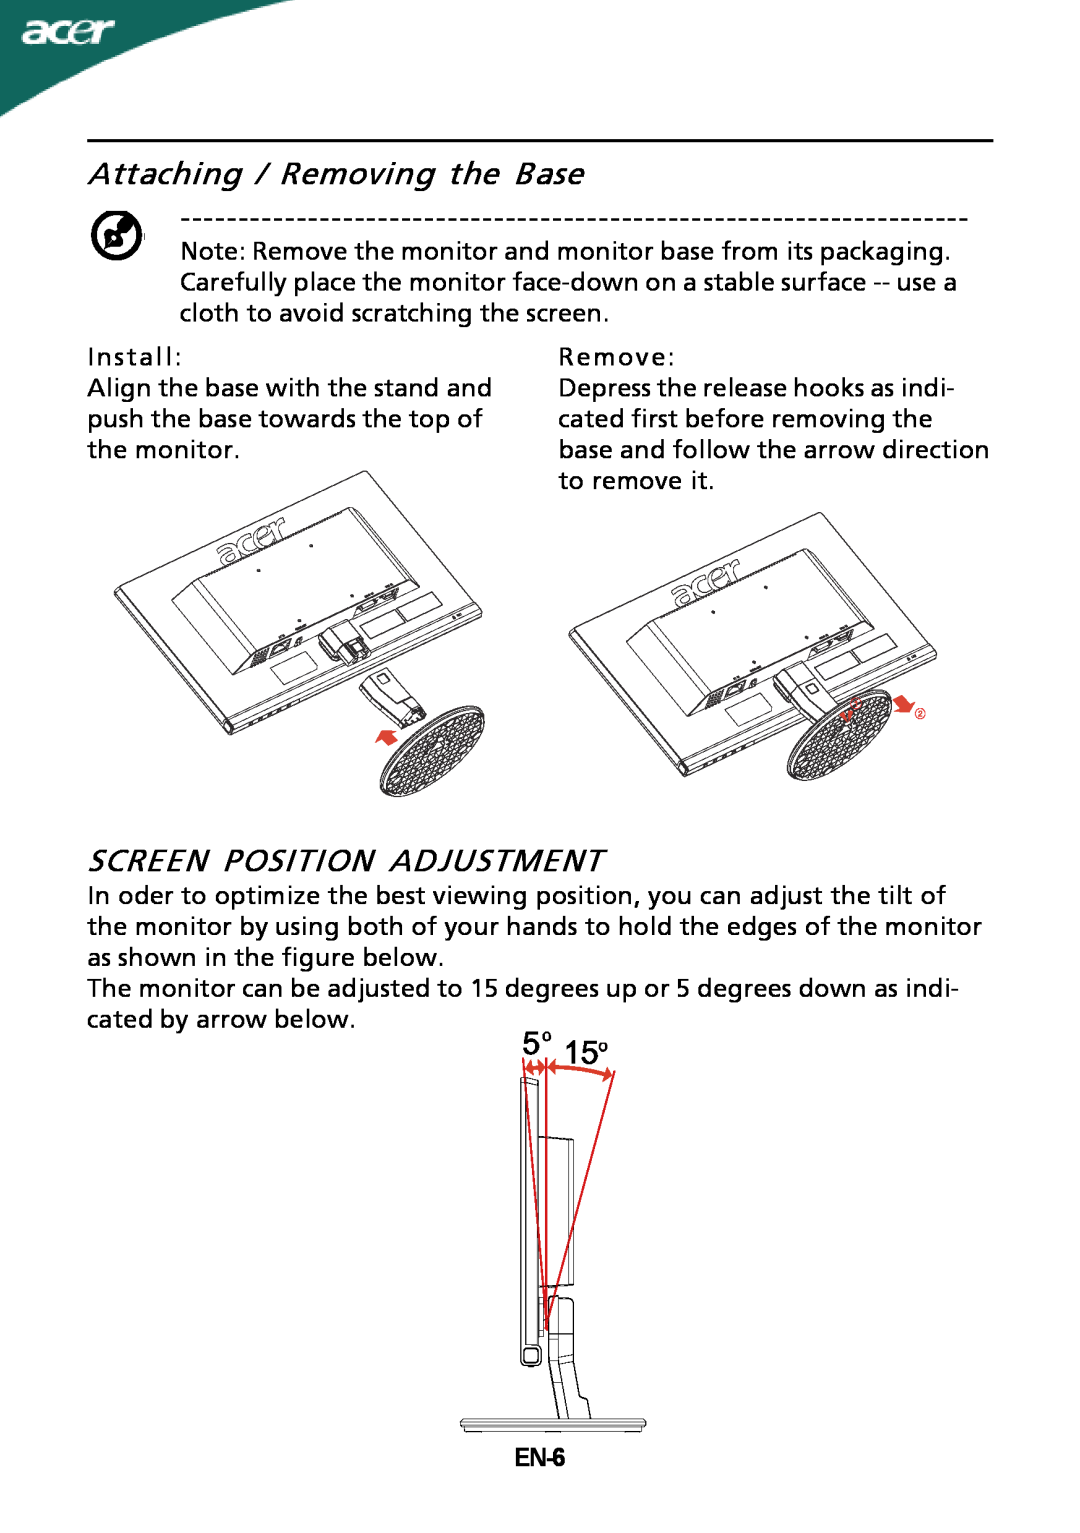 Acer P206HLxbd manual Attaching / Removing the Base, Screen Position Adjustment, EN-6 